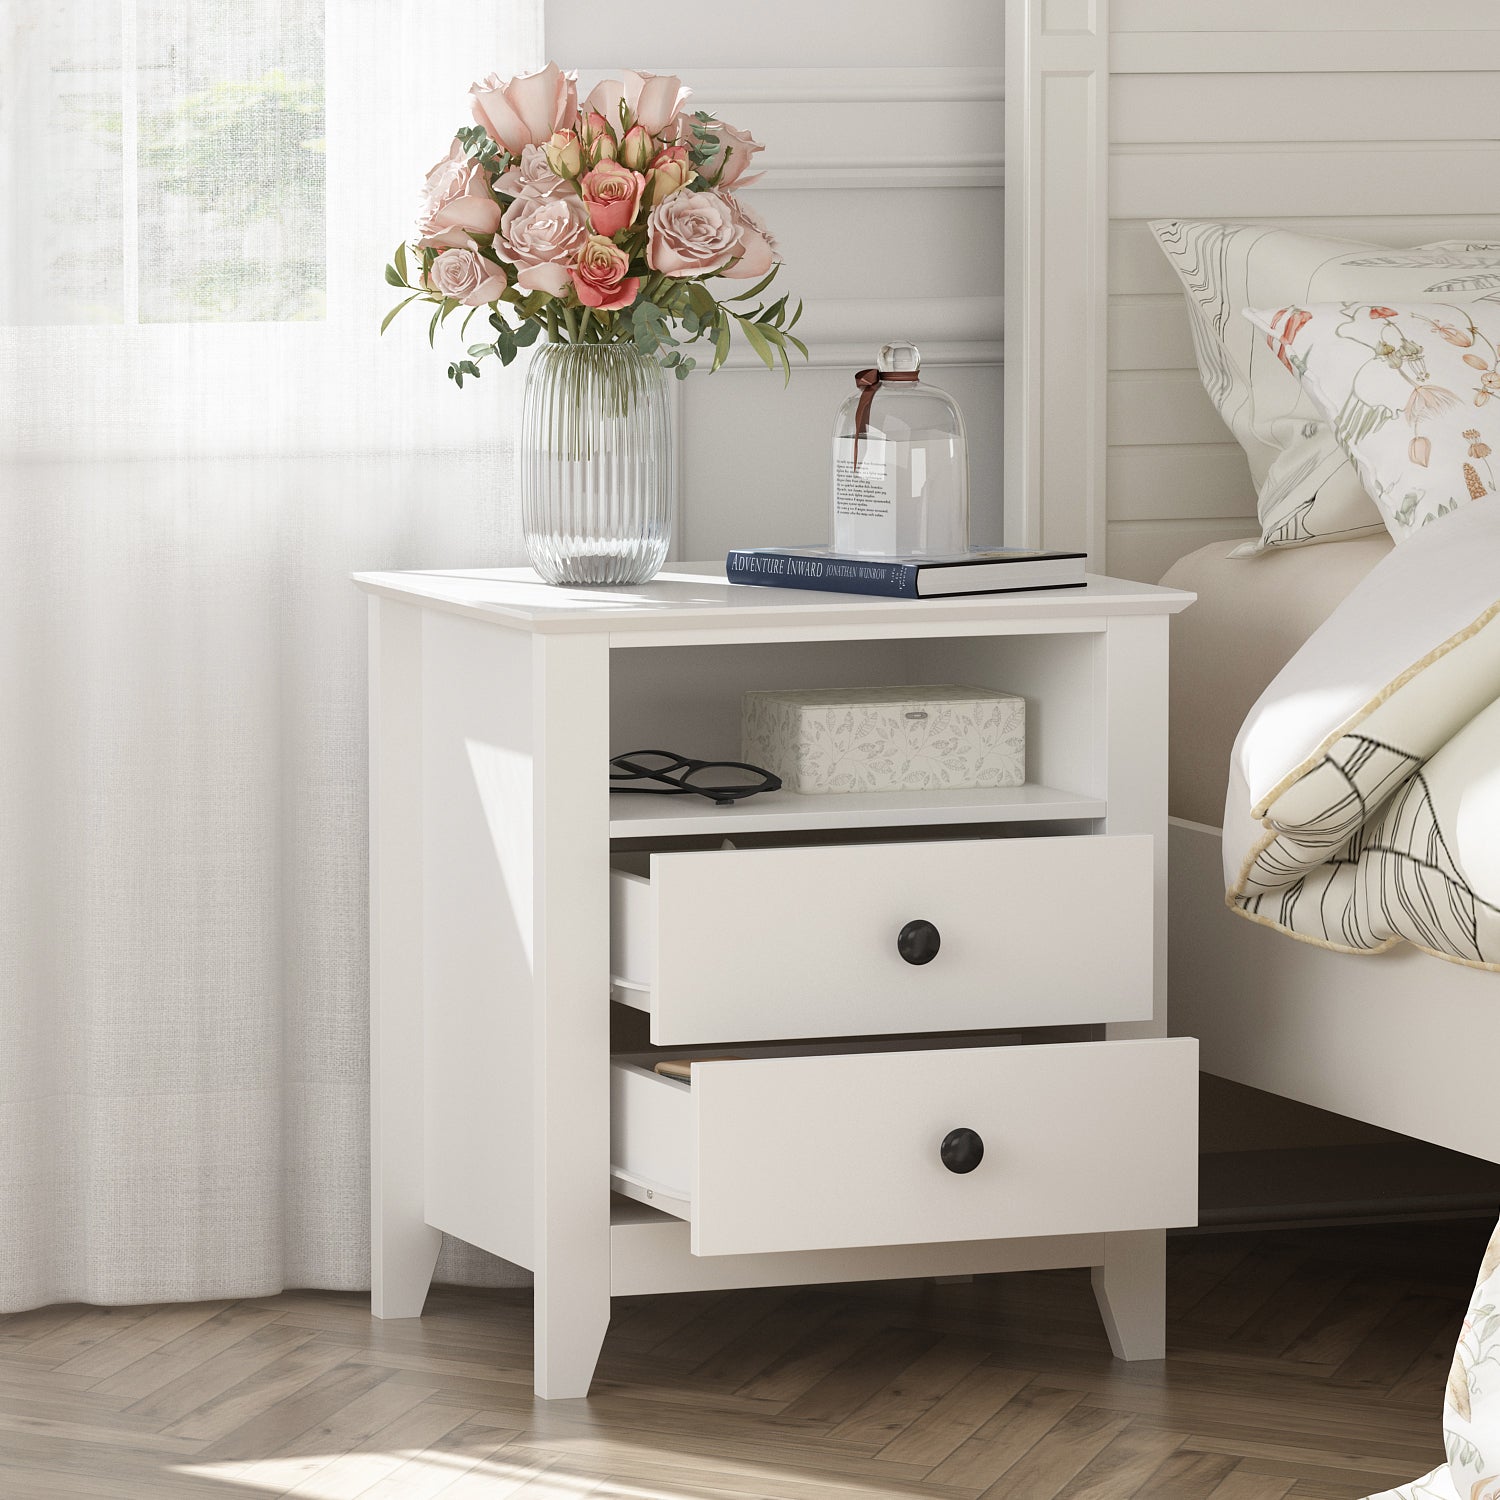 End Table Side Table with 2 Drawers & Shelf Bedside Table Nightstand with Wooden Legs